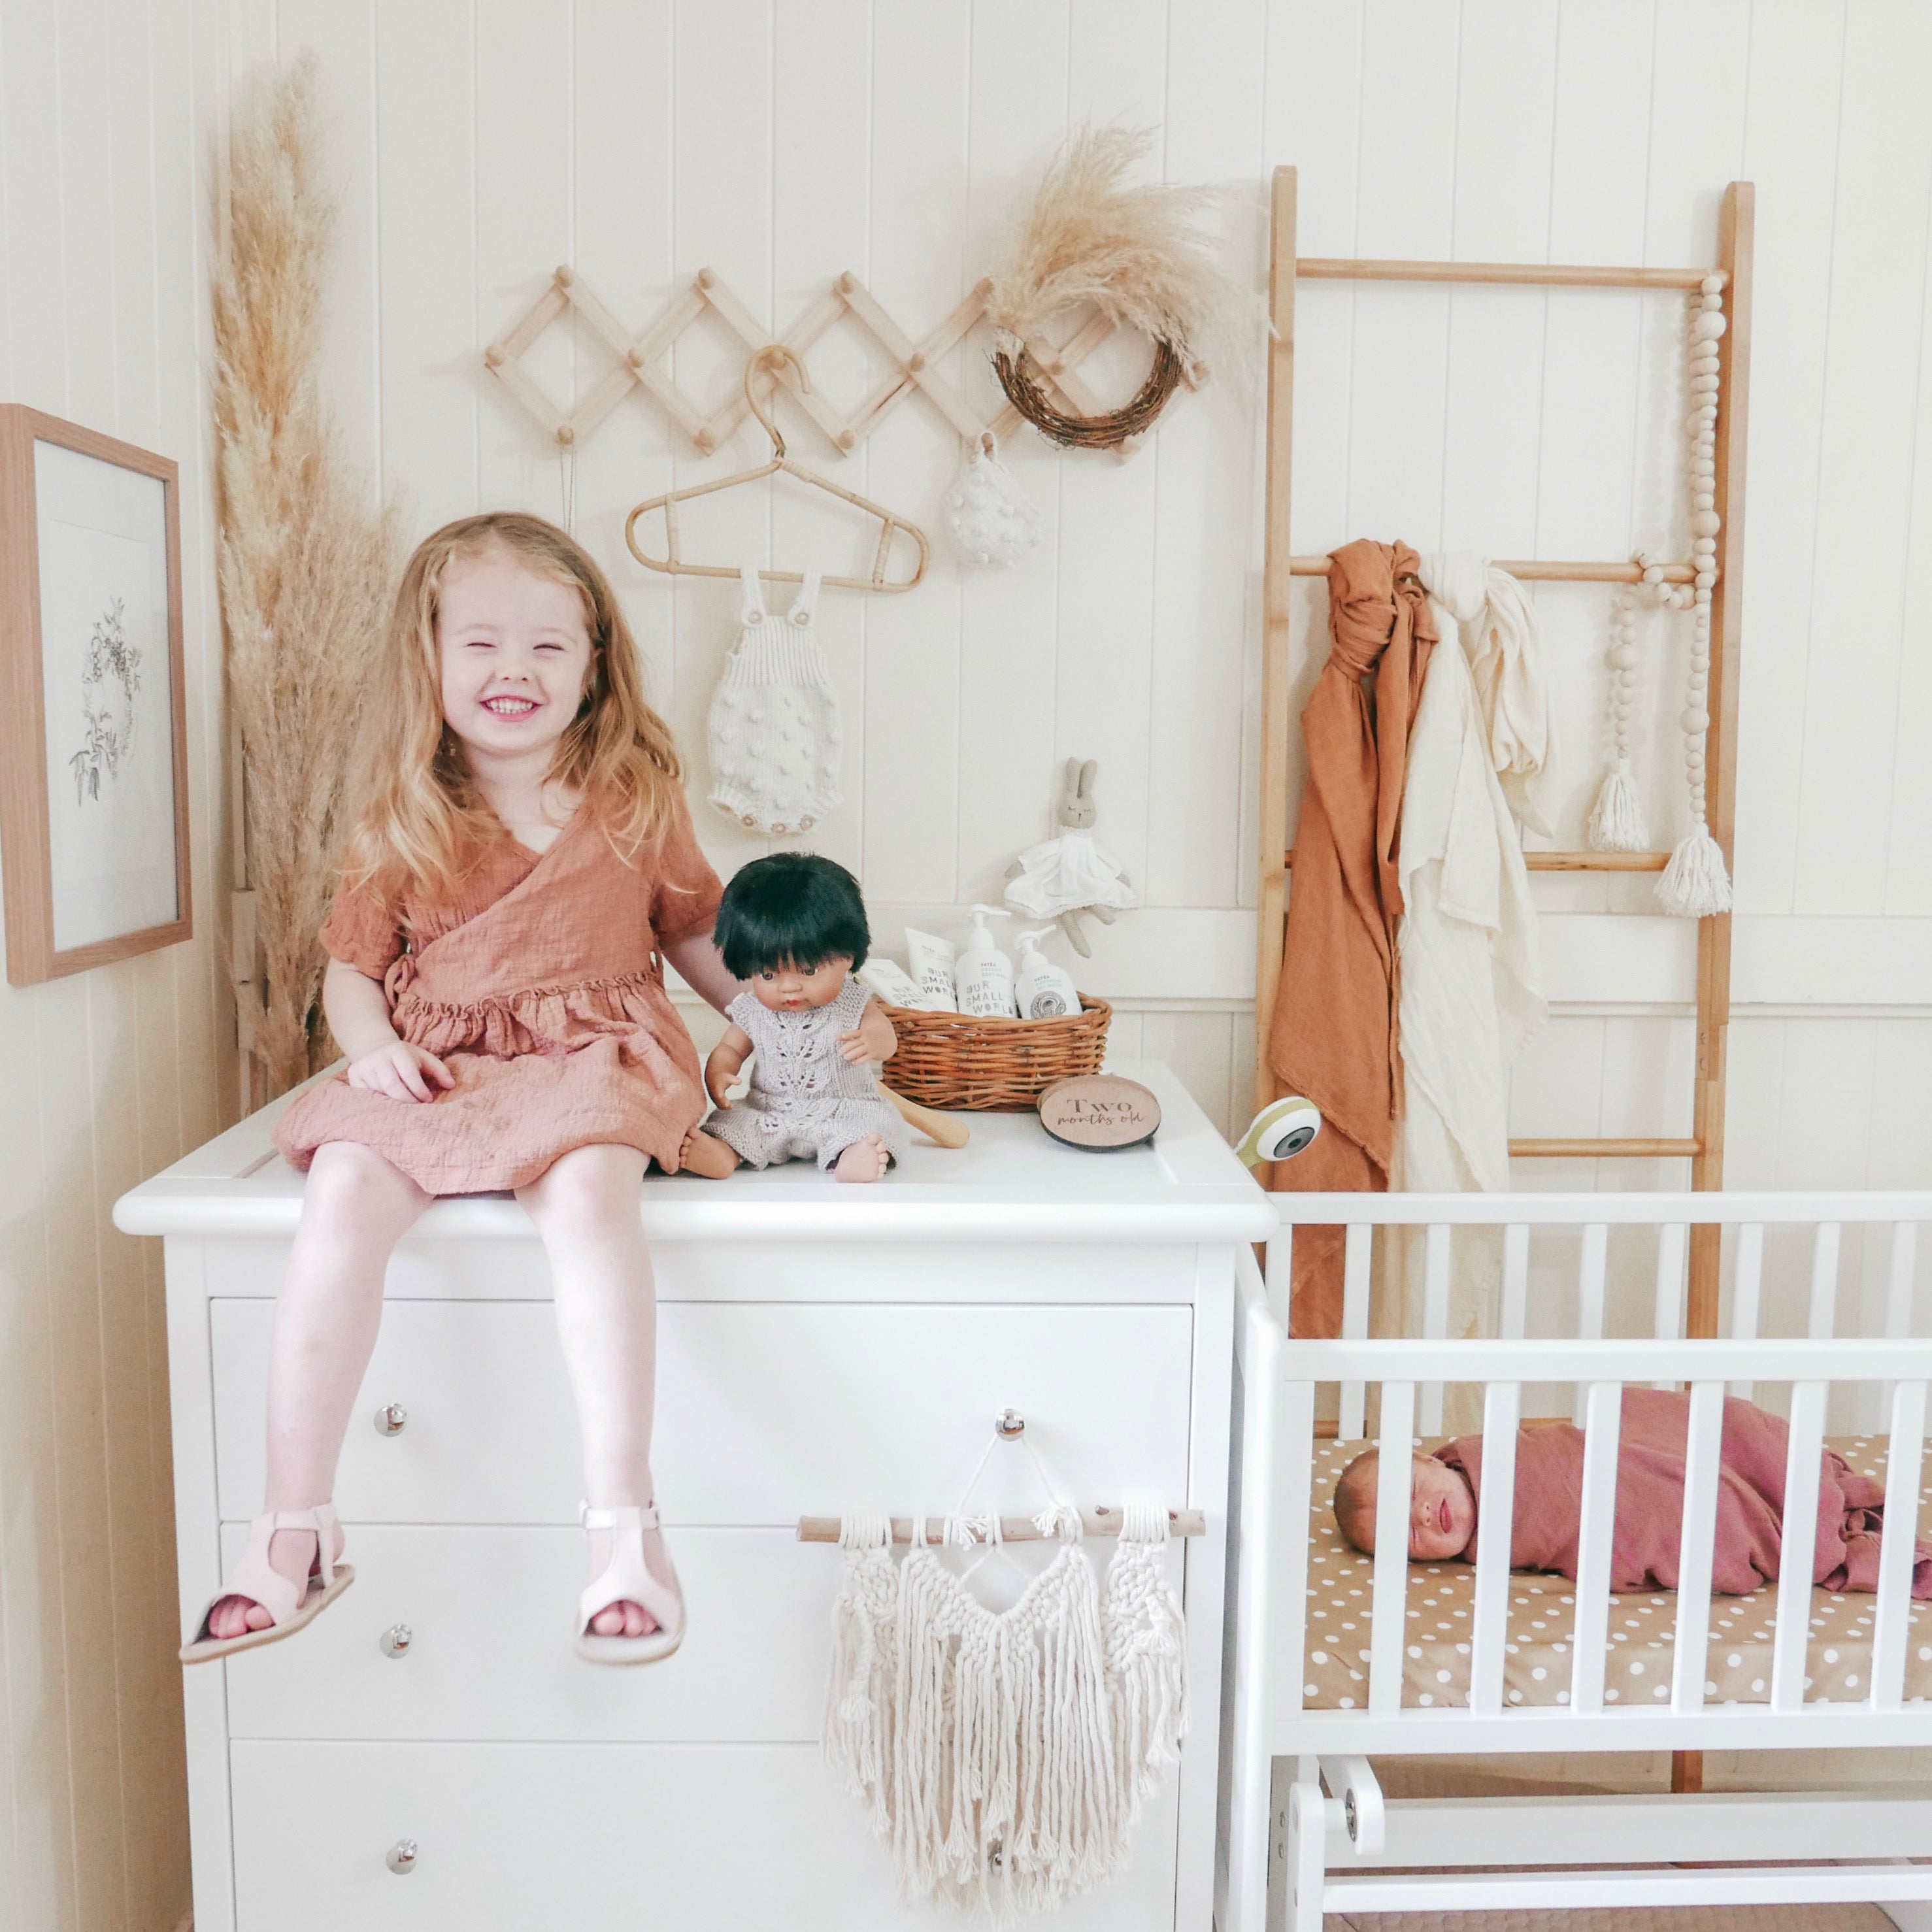 Toddler on Chest of Drawers